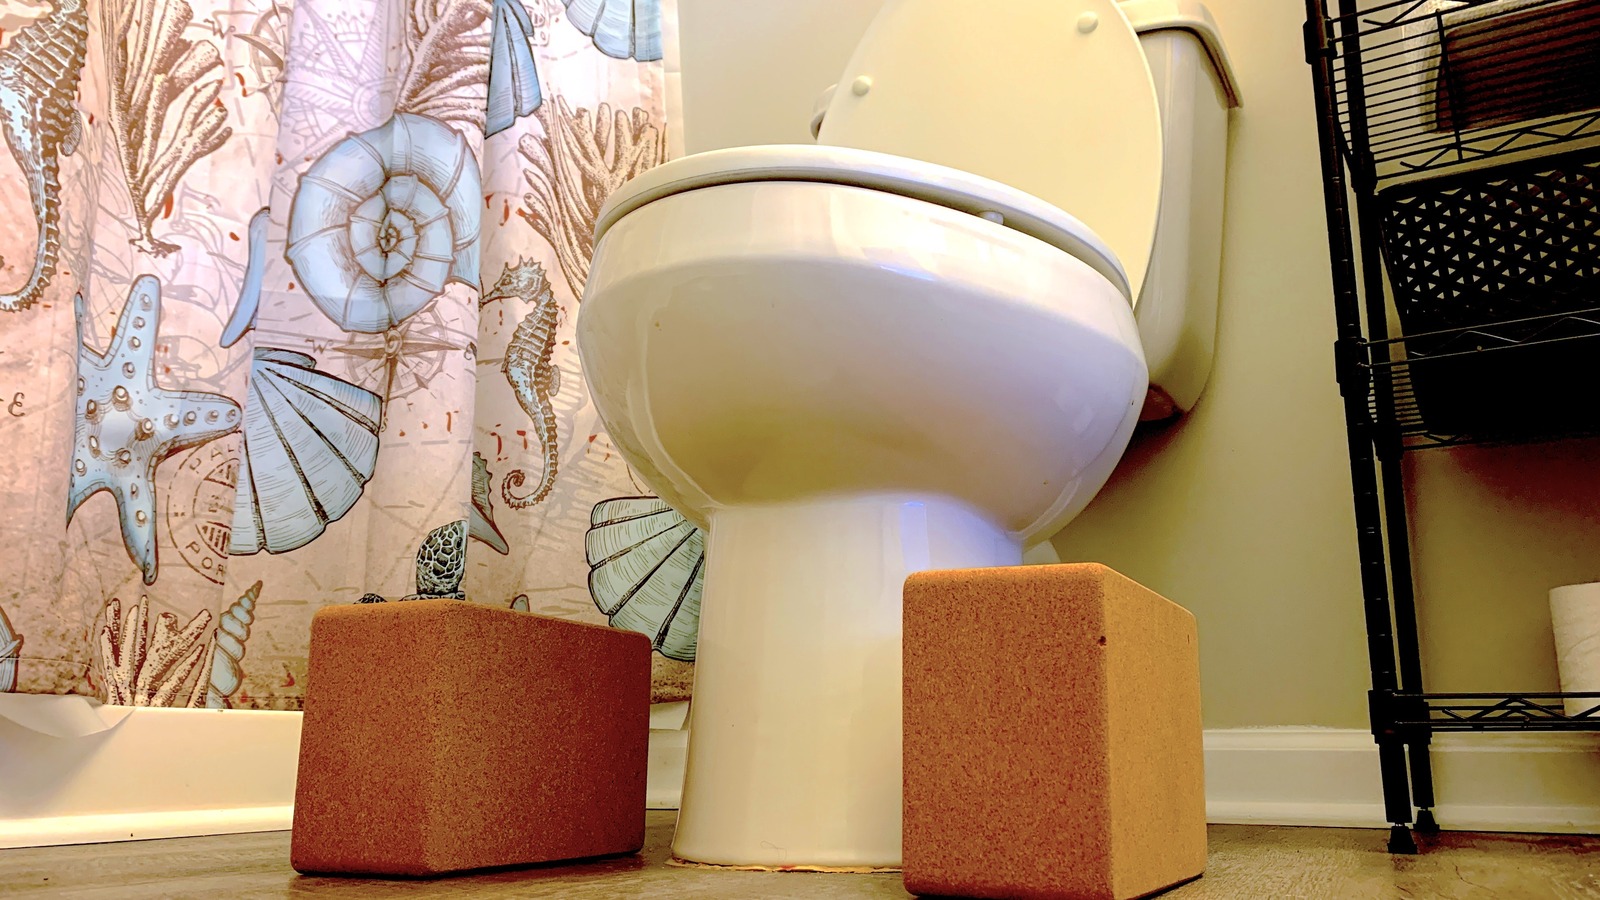 We Tried The Internet's DIY Squatty Potty To Poop Instantly. Here's How It Went - Health Digest